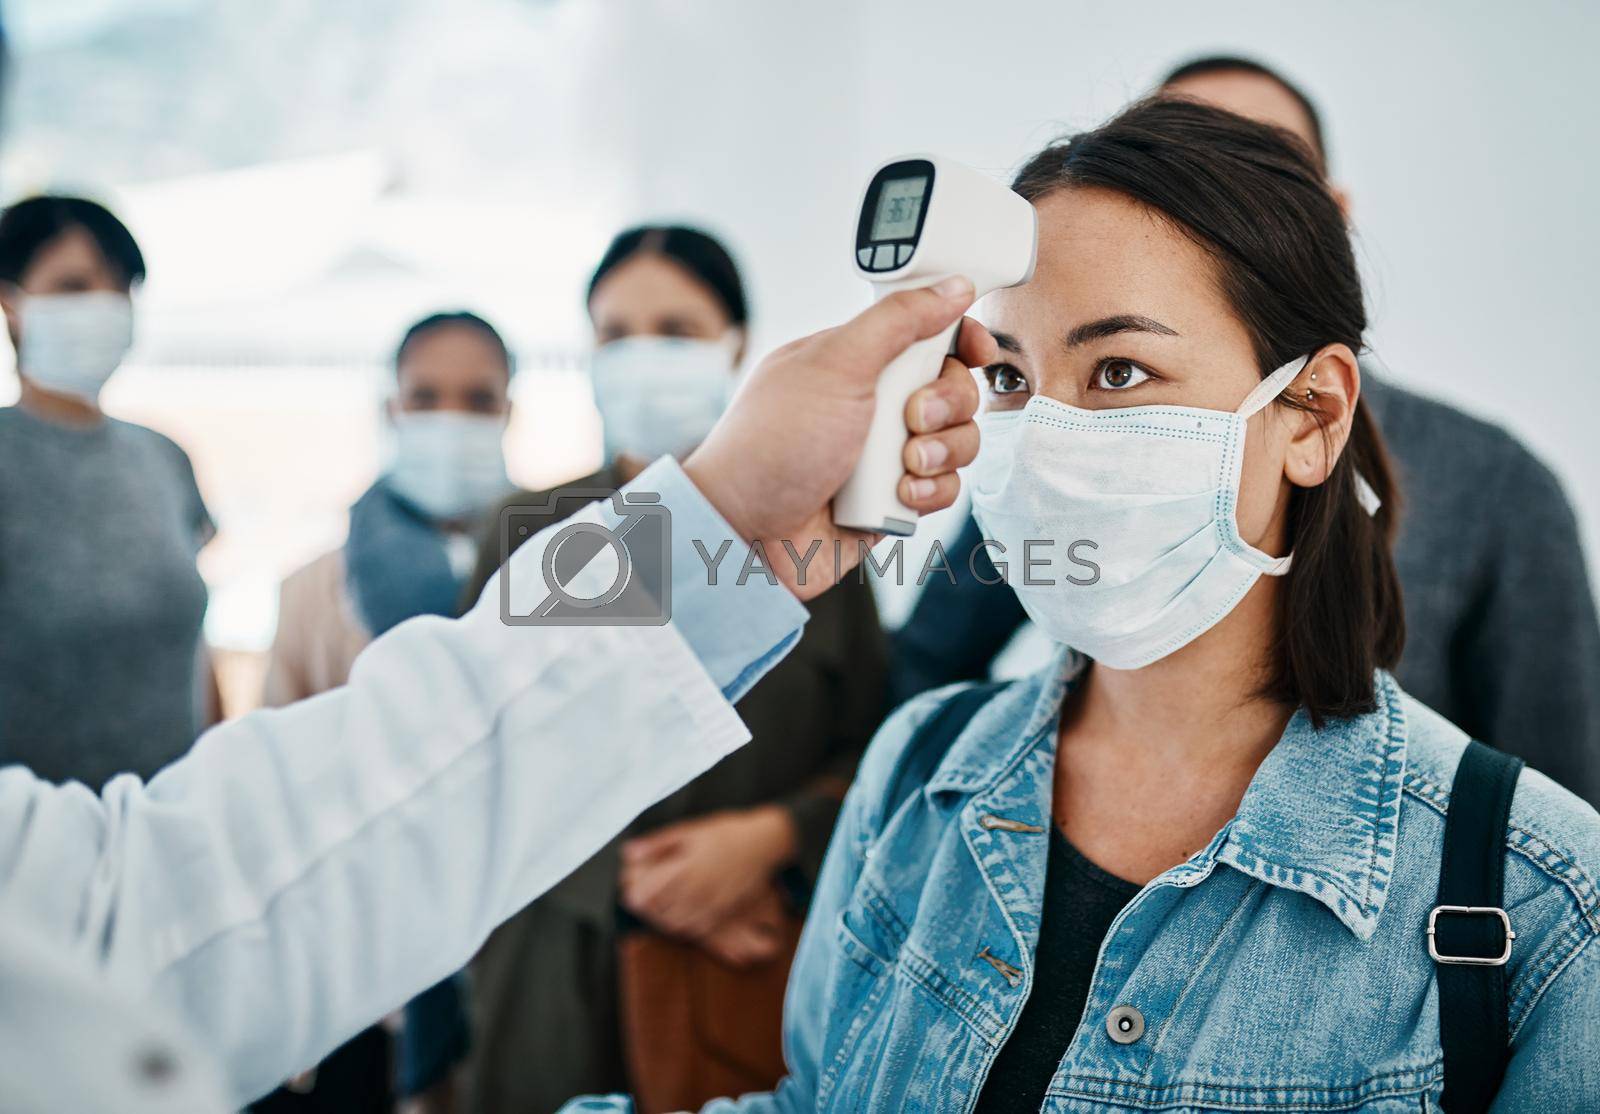 Covid screening with a female tourist in a mask having her temperature taken with an infrared thermometer while waiting to board in an airport. Travel restrictions during the corona virus pandemic.